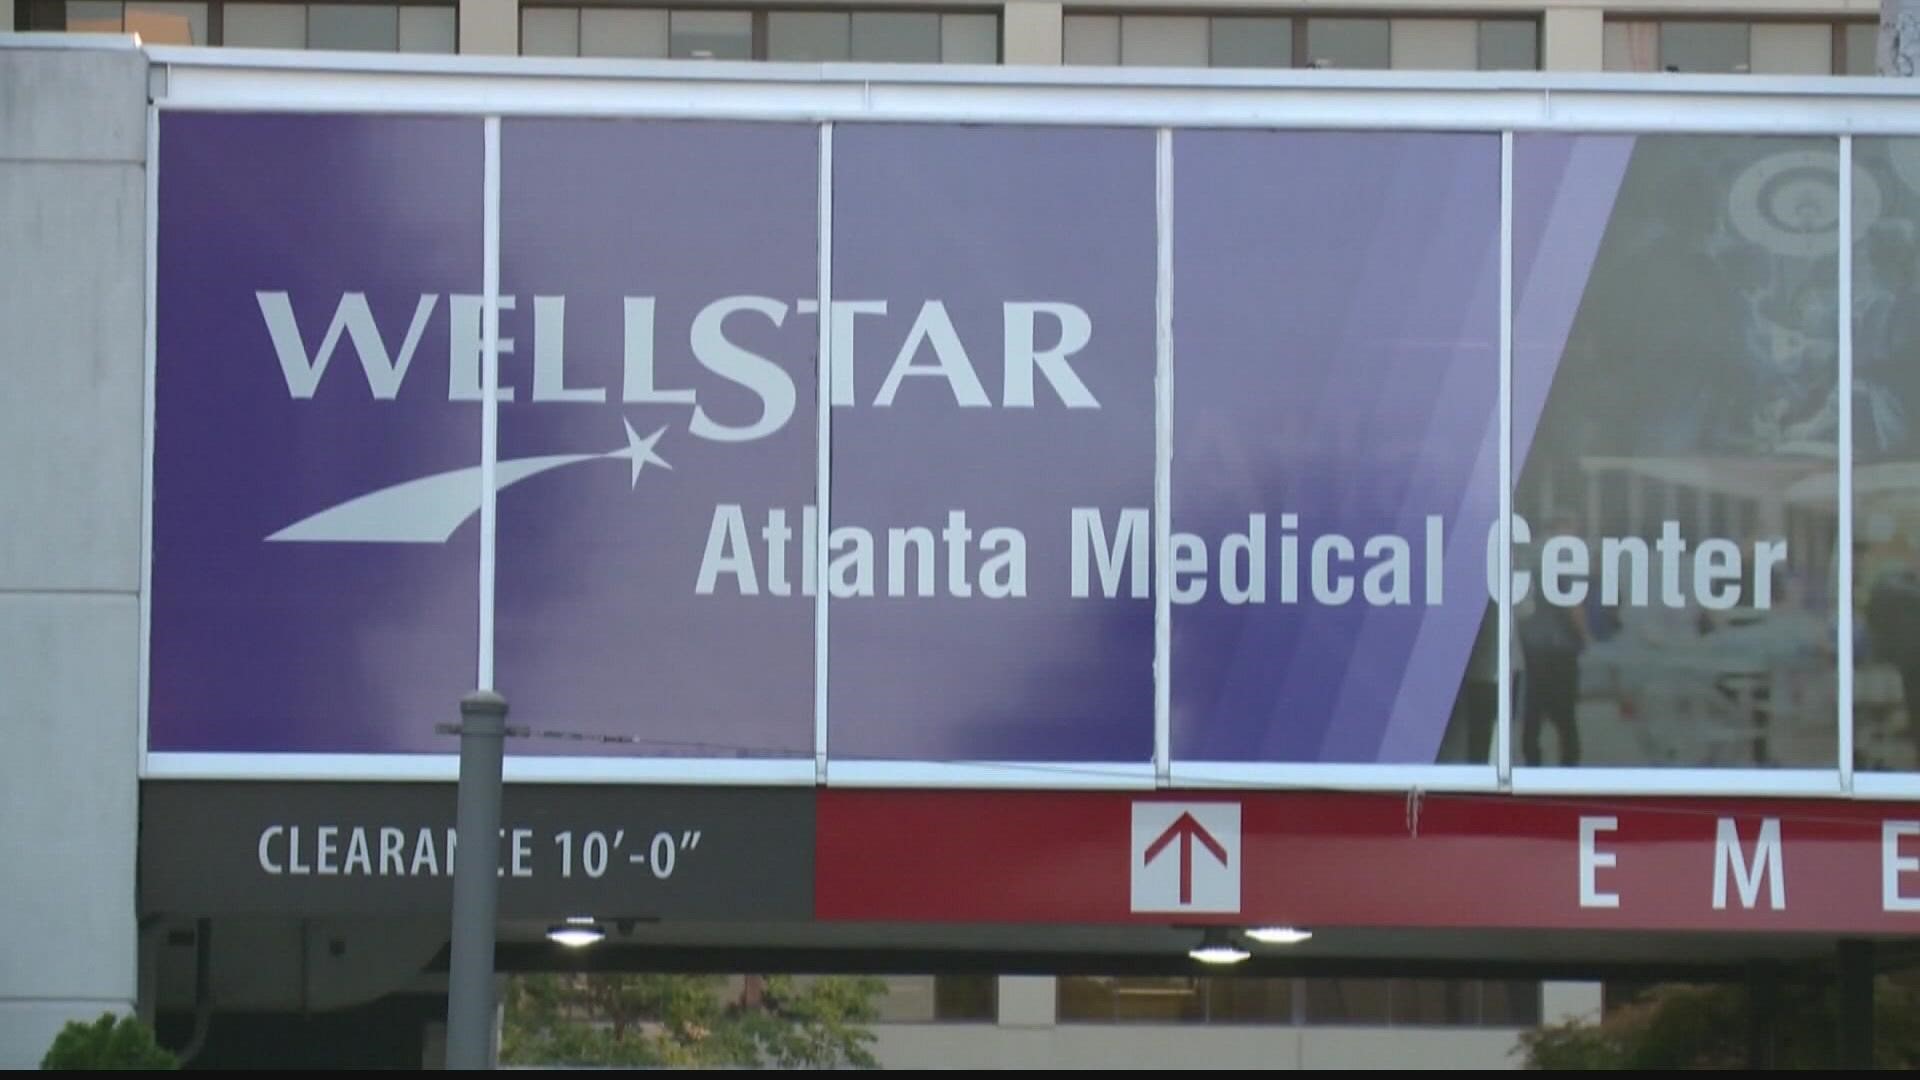 It comes after the closing of Atlanta Medical Center last year.